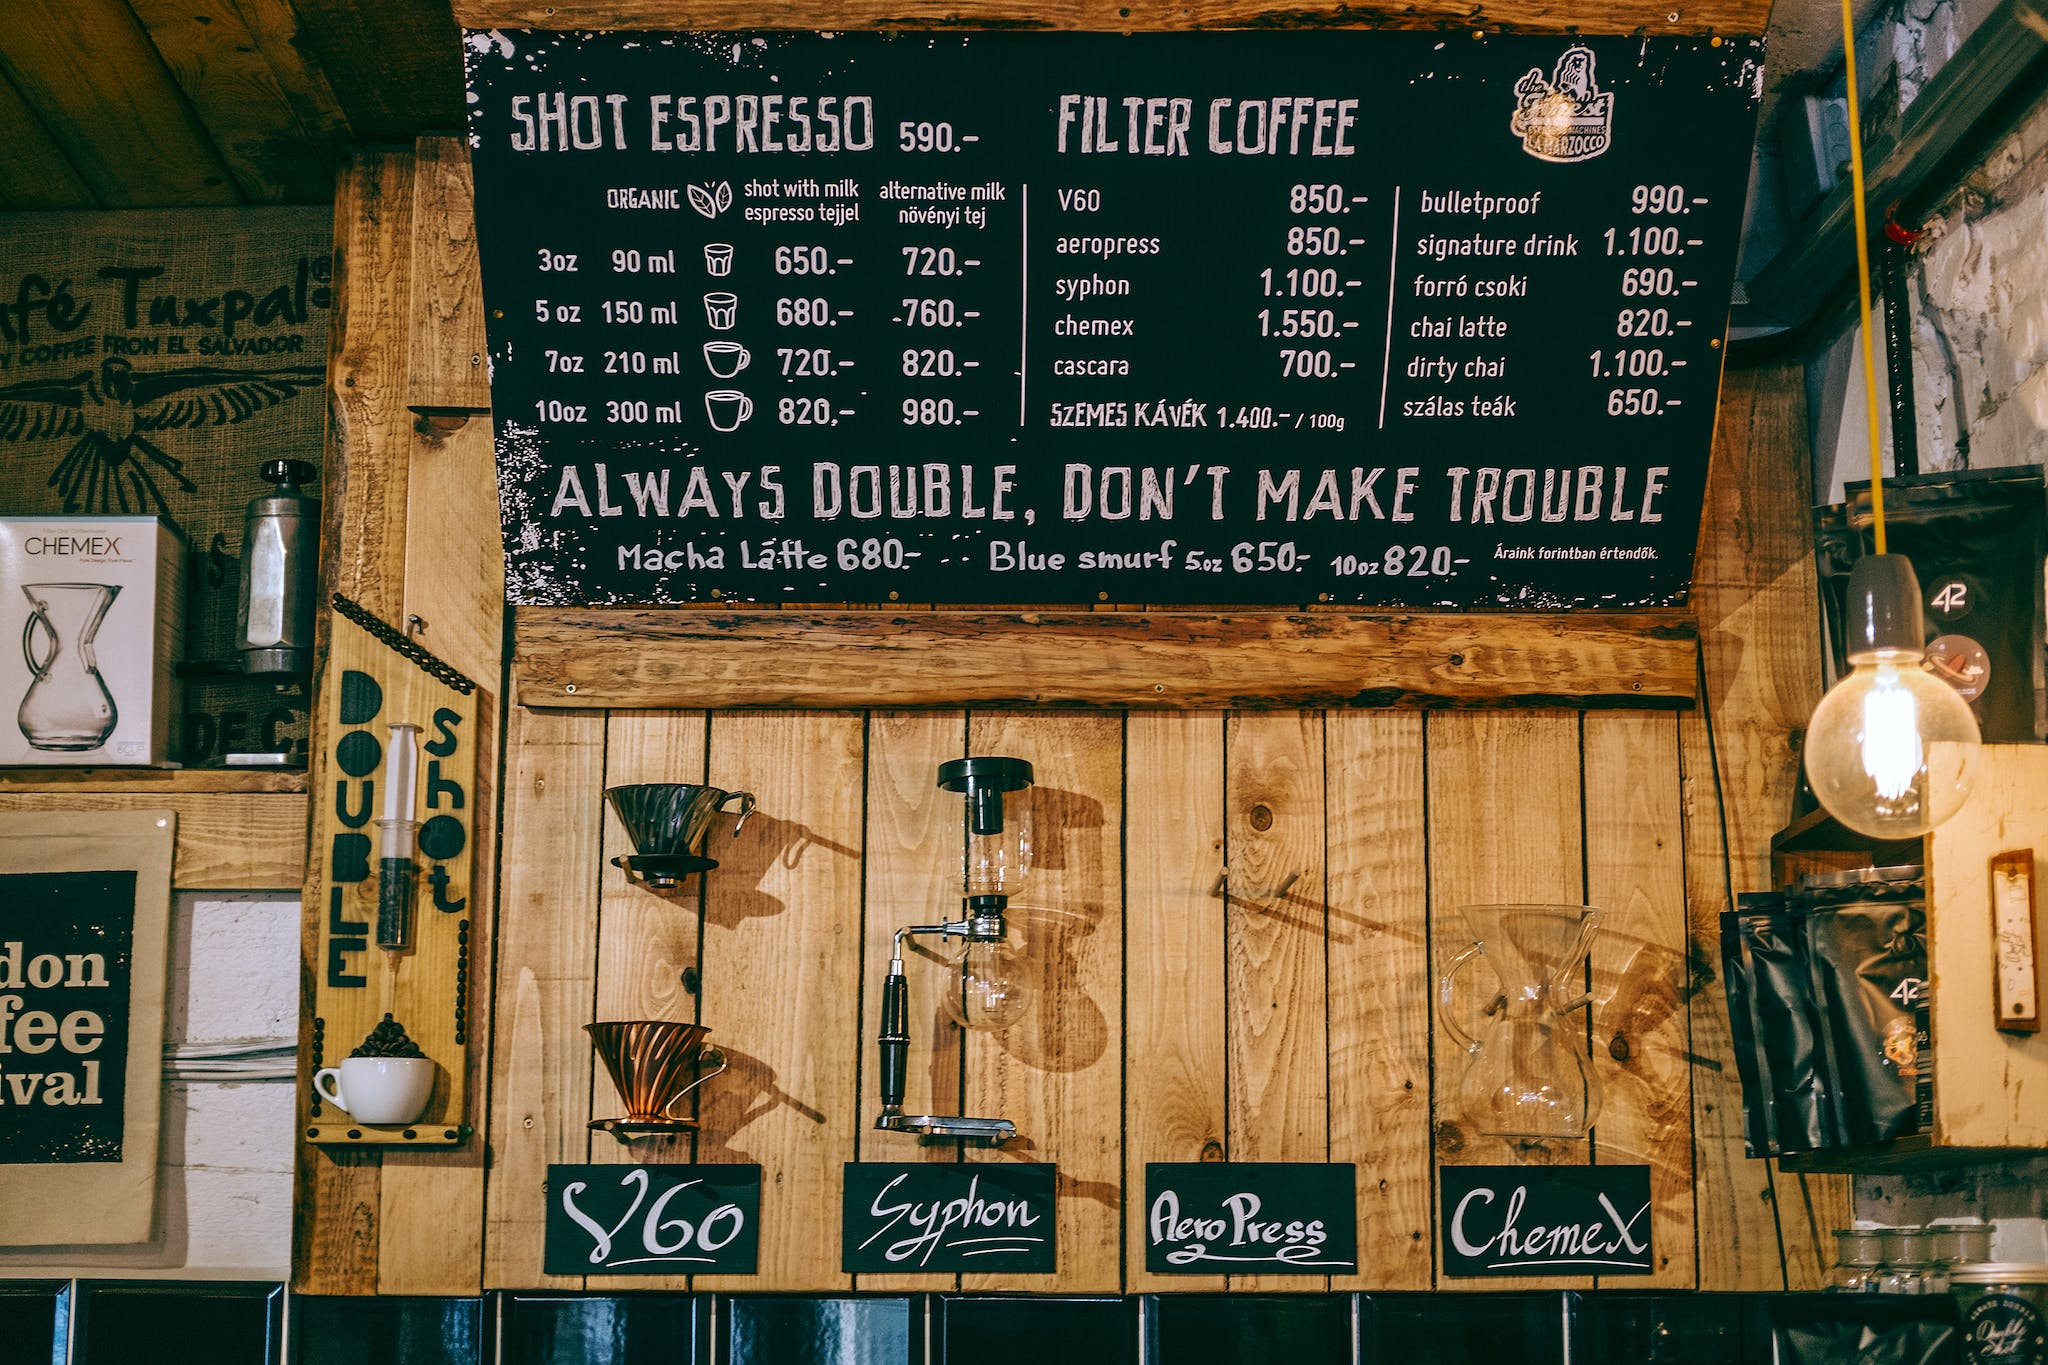 Cozy coffee house with creative decorated menu board